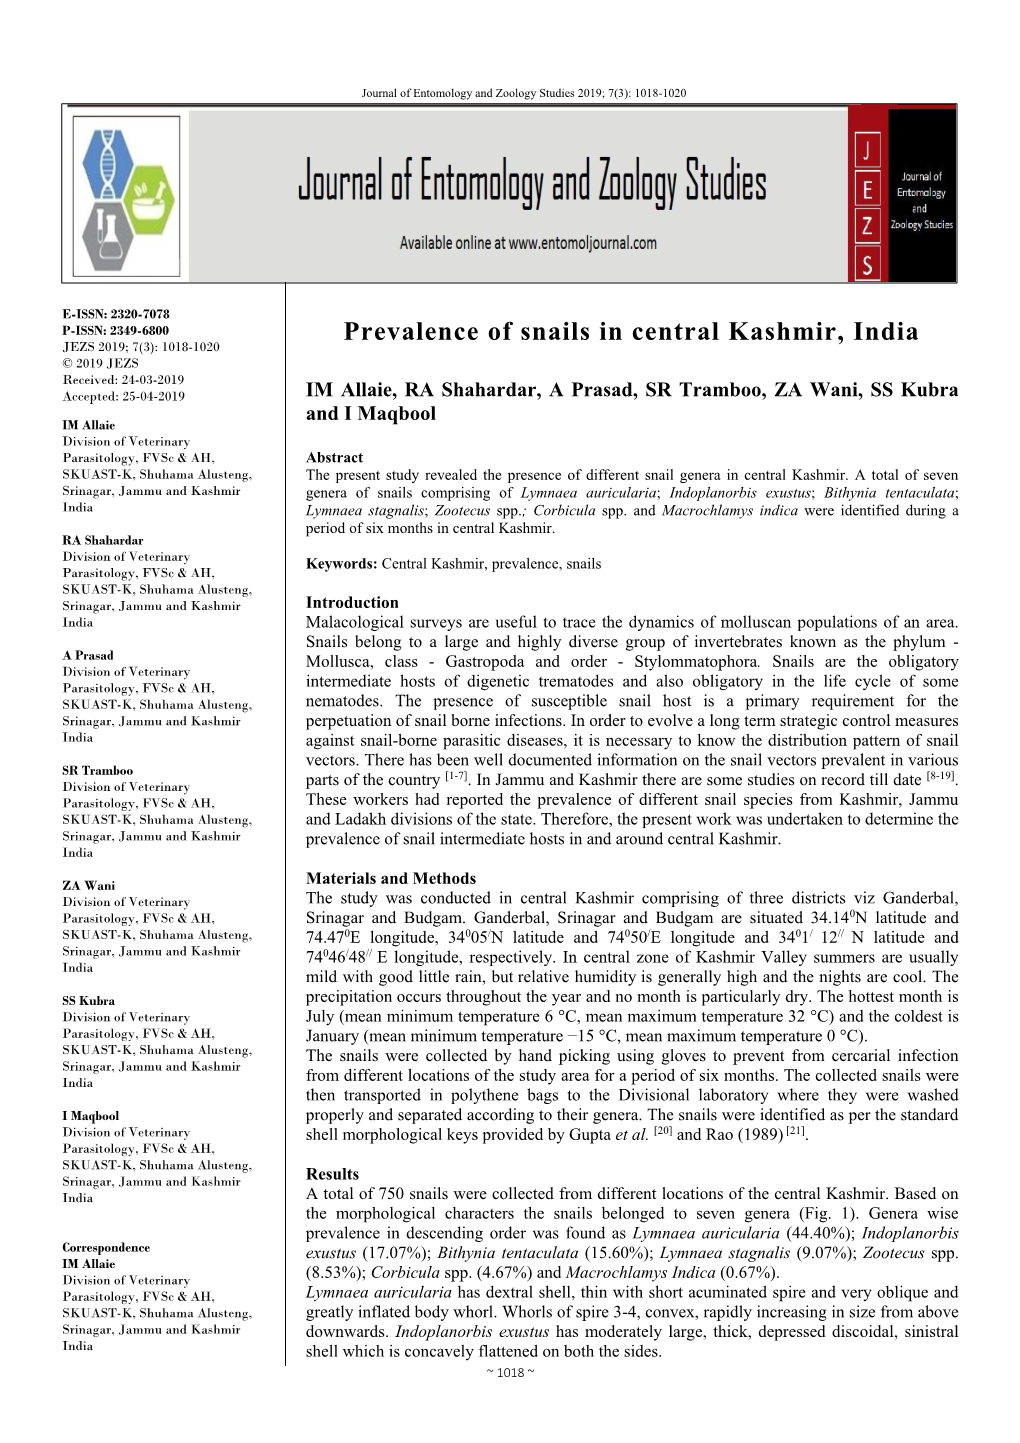 Prevalence of Snails in Central Kashmir, India